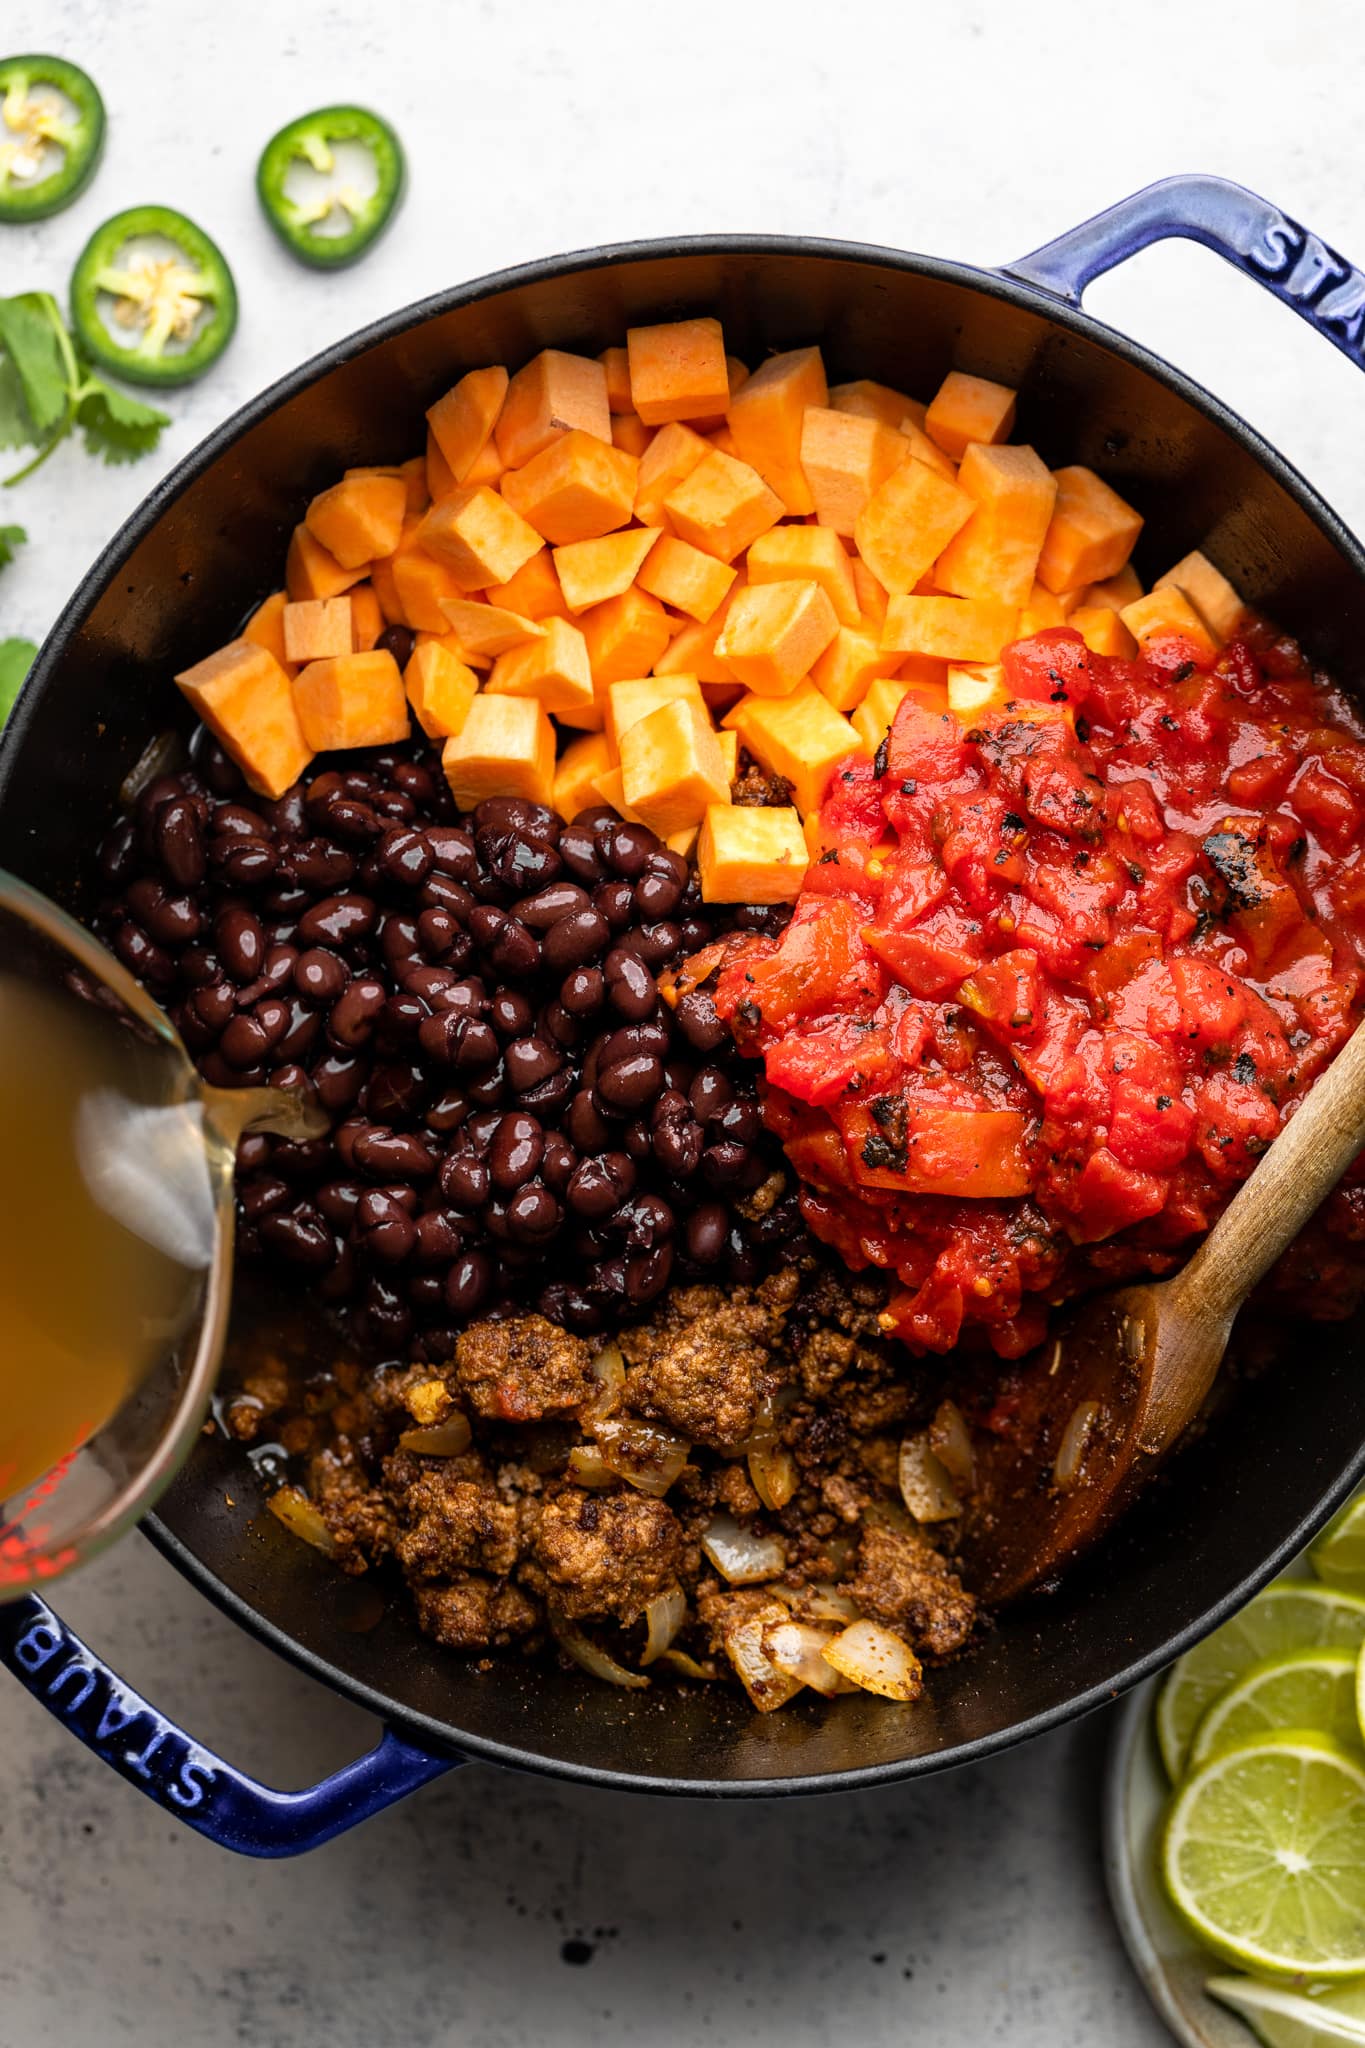 black beans, broth, sweet potato, and tomato in pot